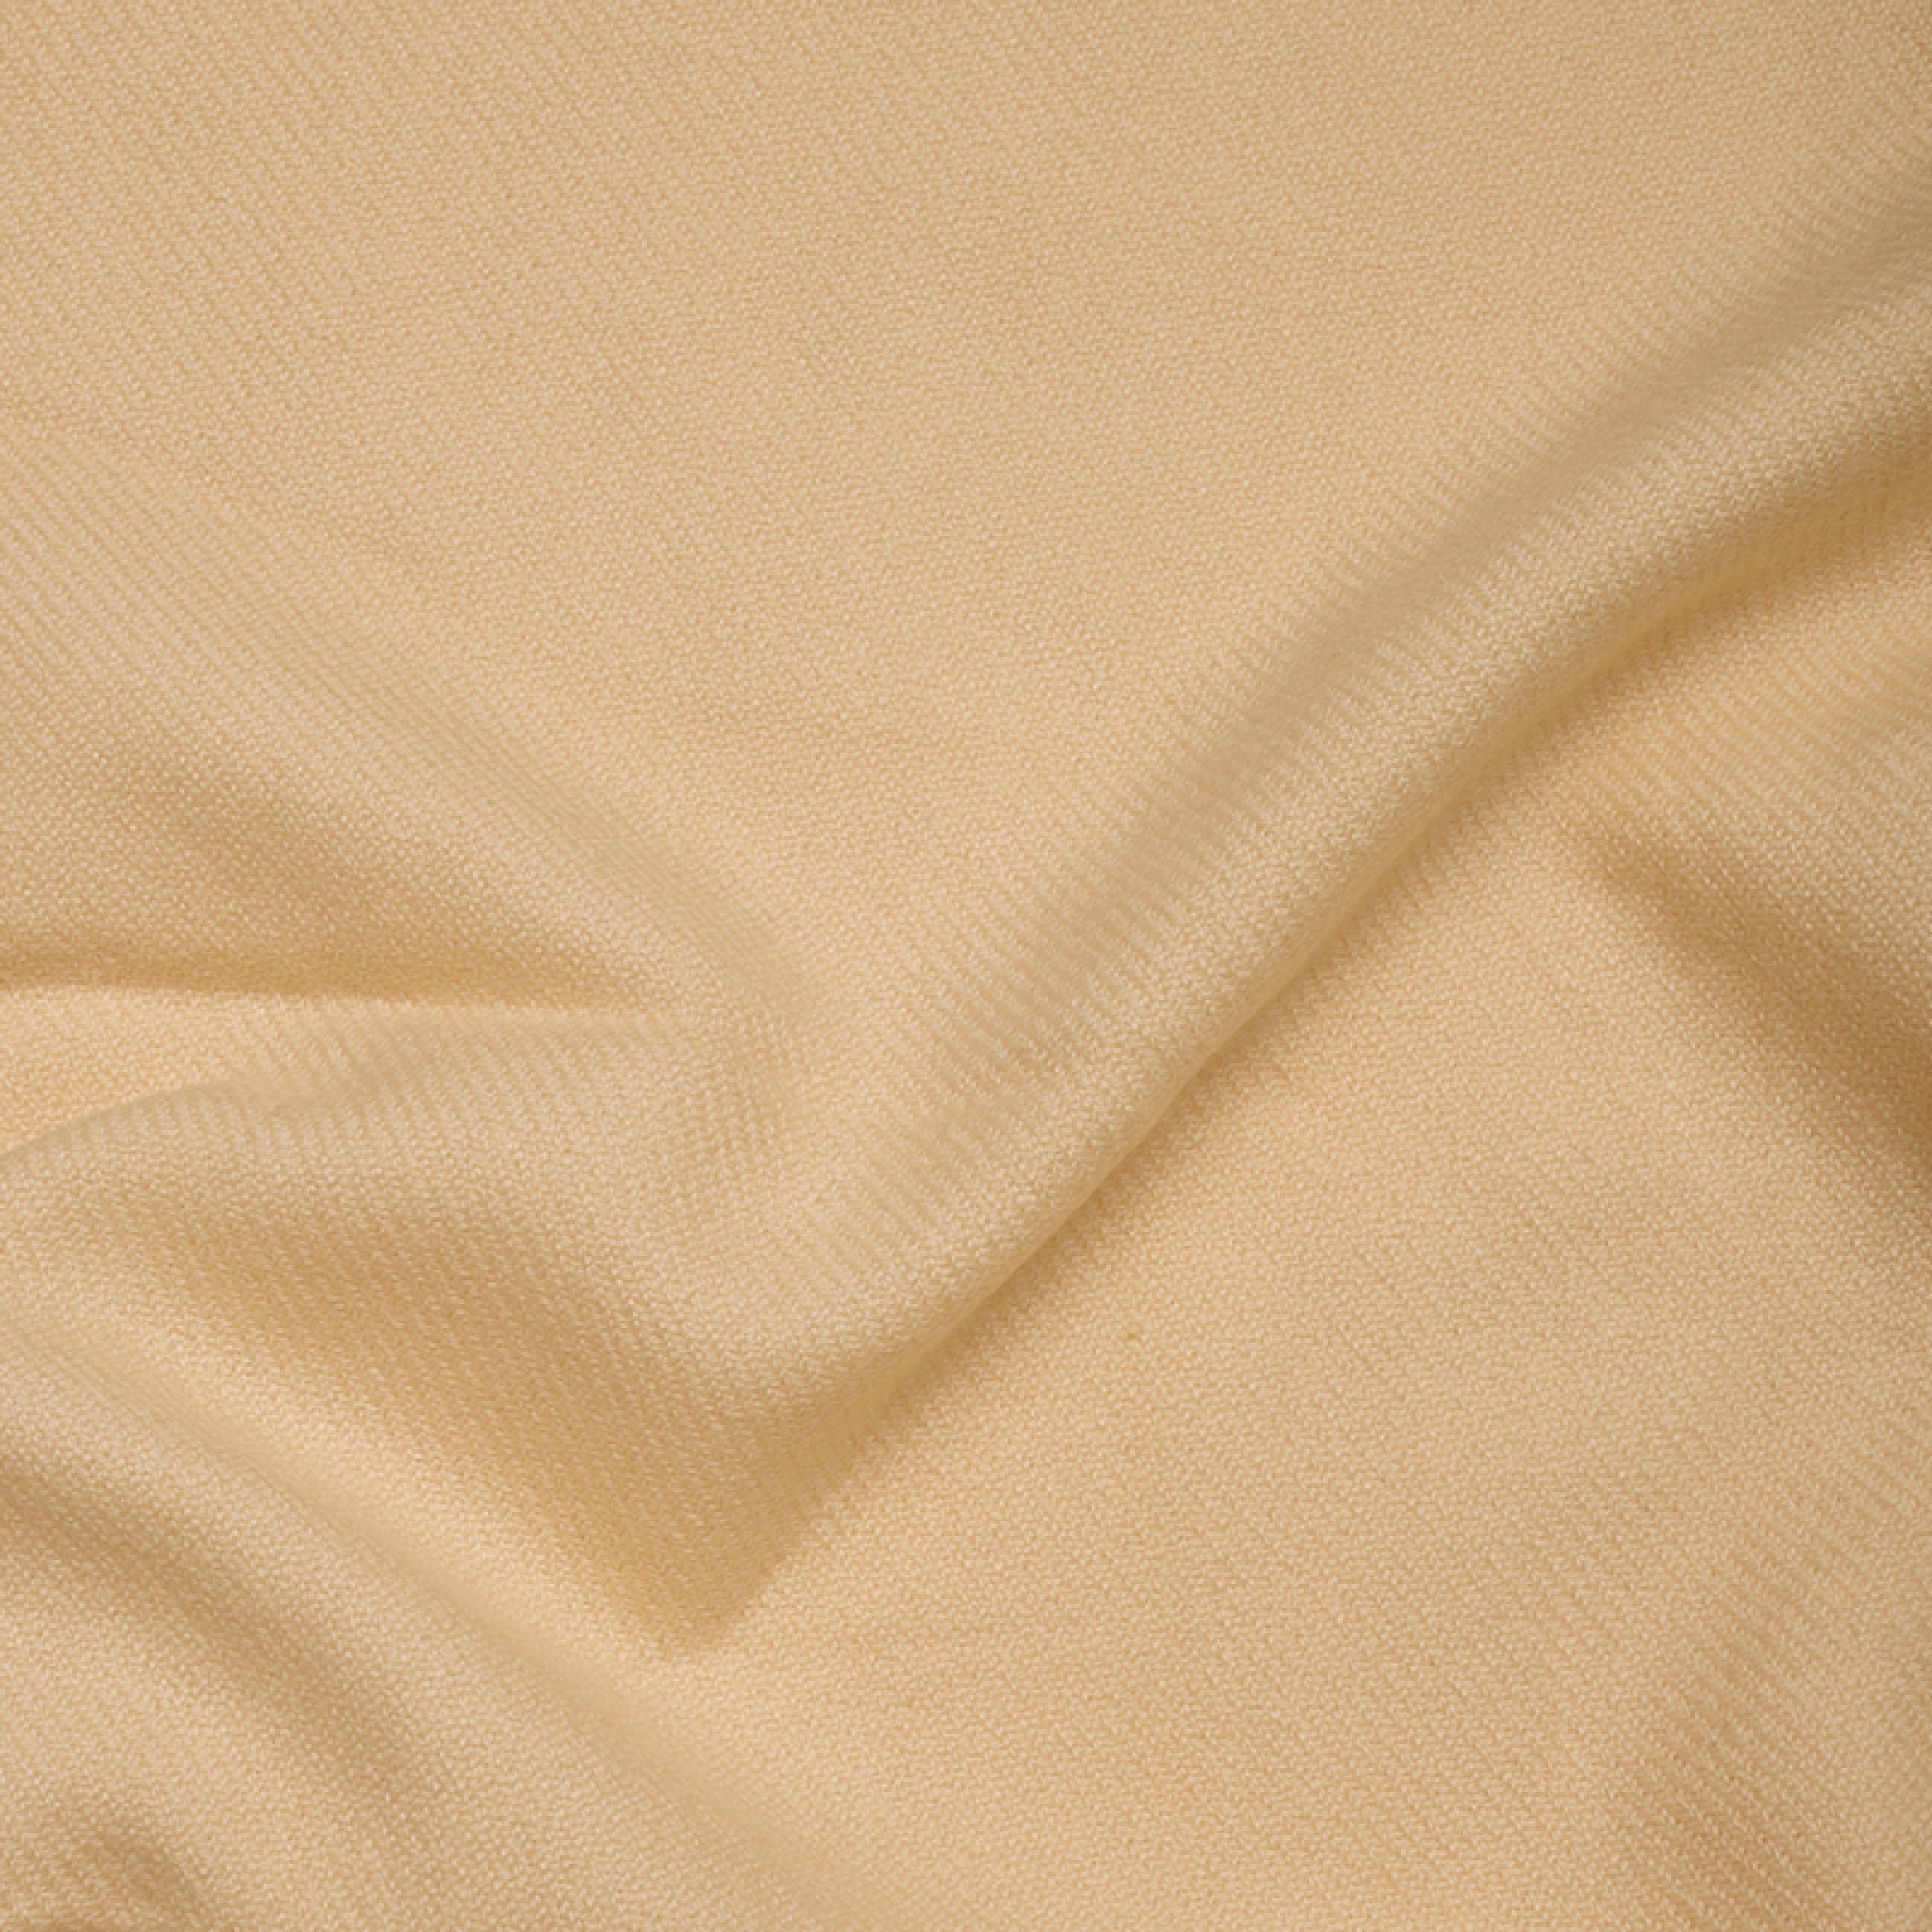 Cashmere cashmere donna cocooning toodoo plain l 220 x 220 champagne 220x220cm